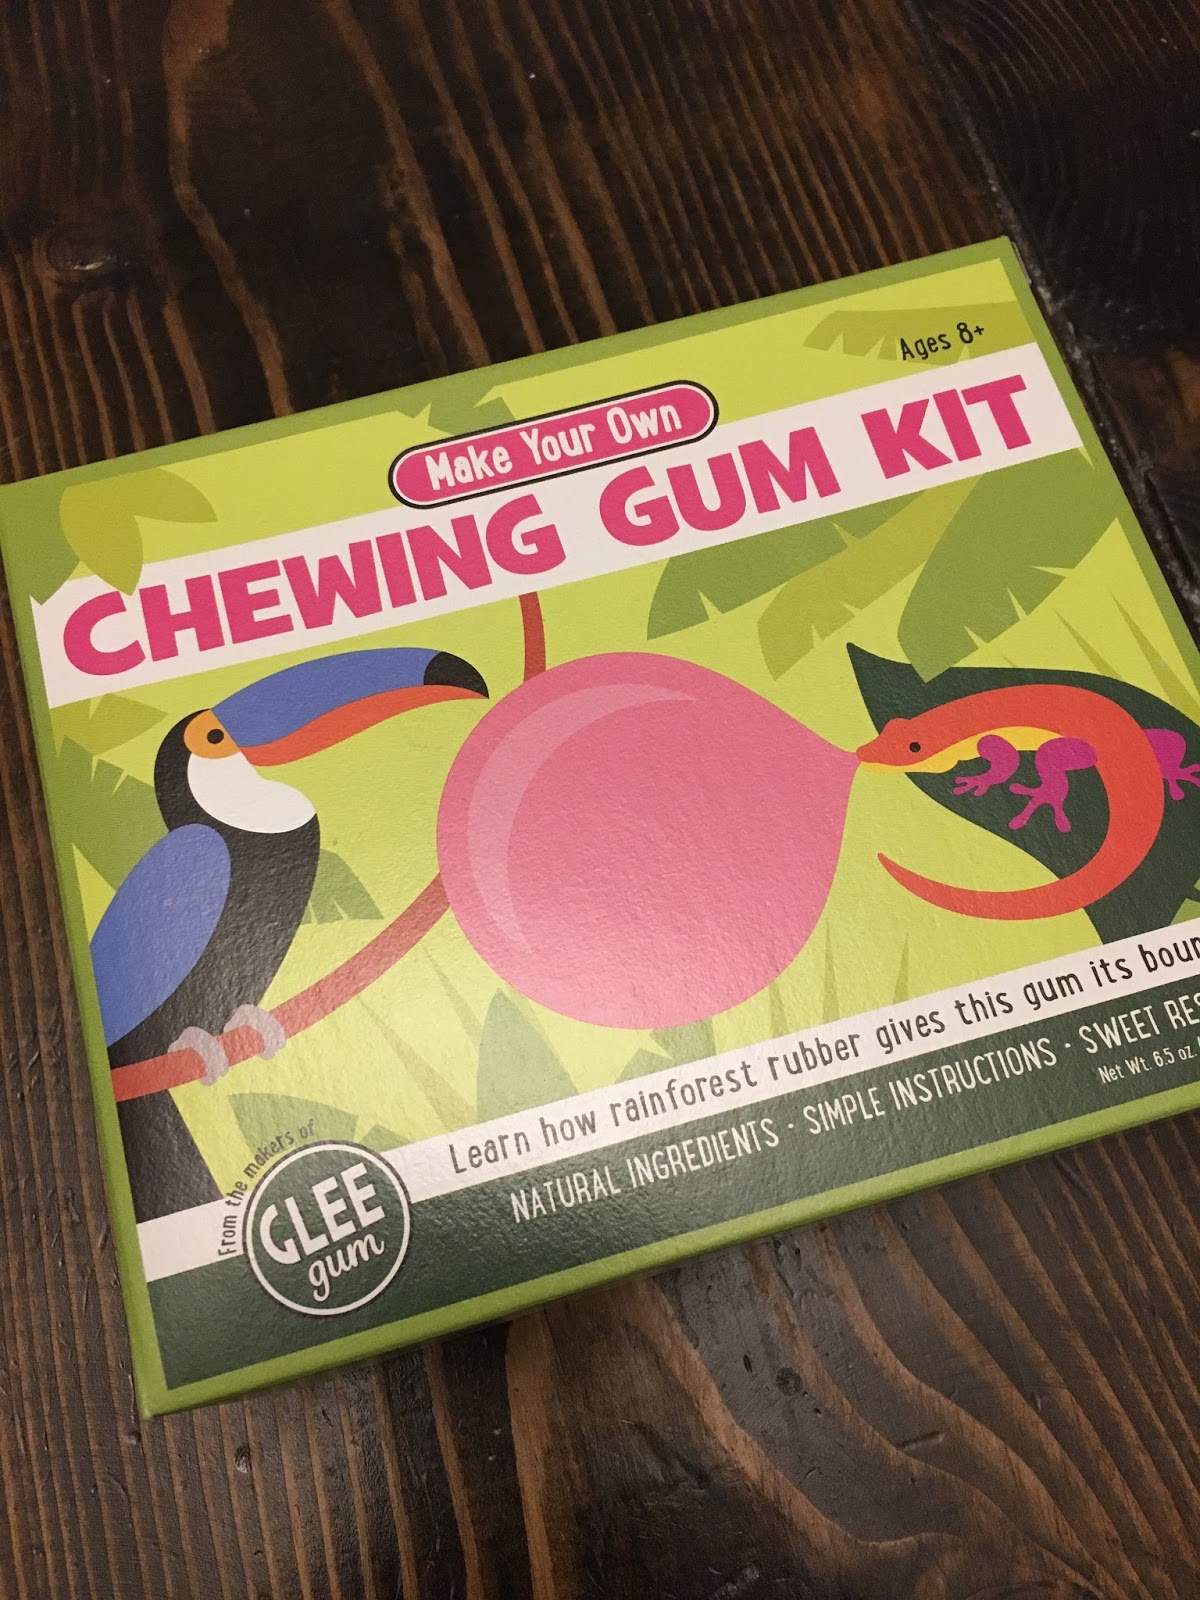 Heart Zipper Glee Gum Make Your Own Chewing Gum Kit Review Coupon Code